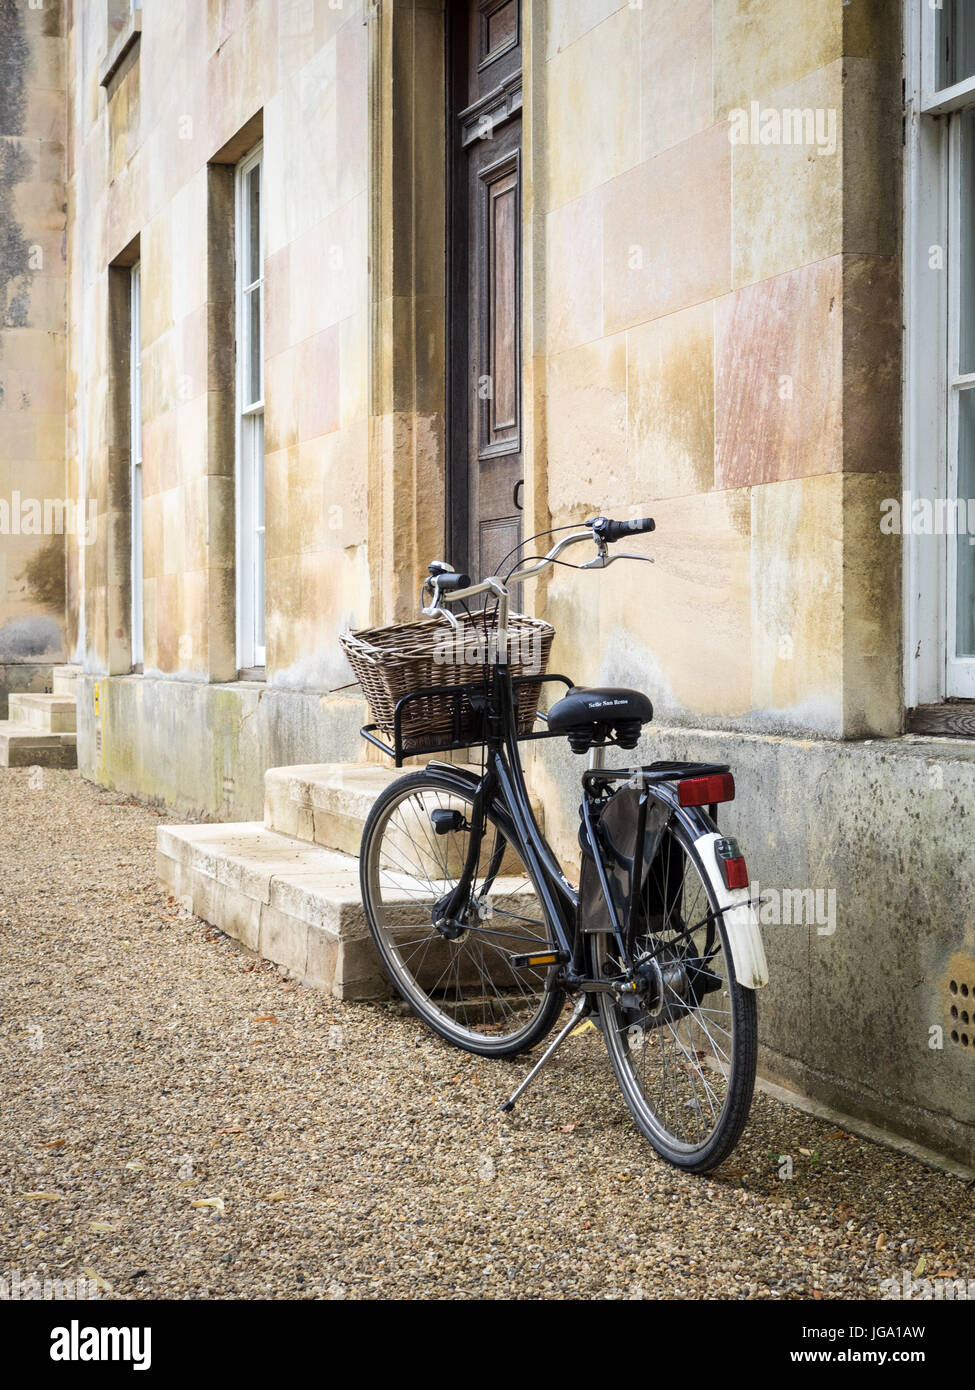 Student Bike outside college buildings at Downing College, part of the University of Cambridge, UK. Downing College was founded in 1800. Stock Photo